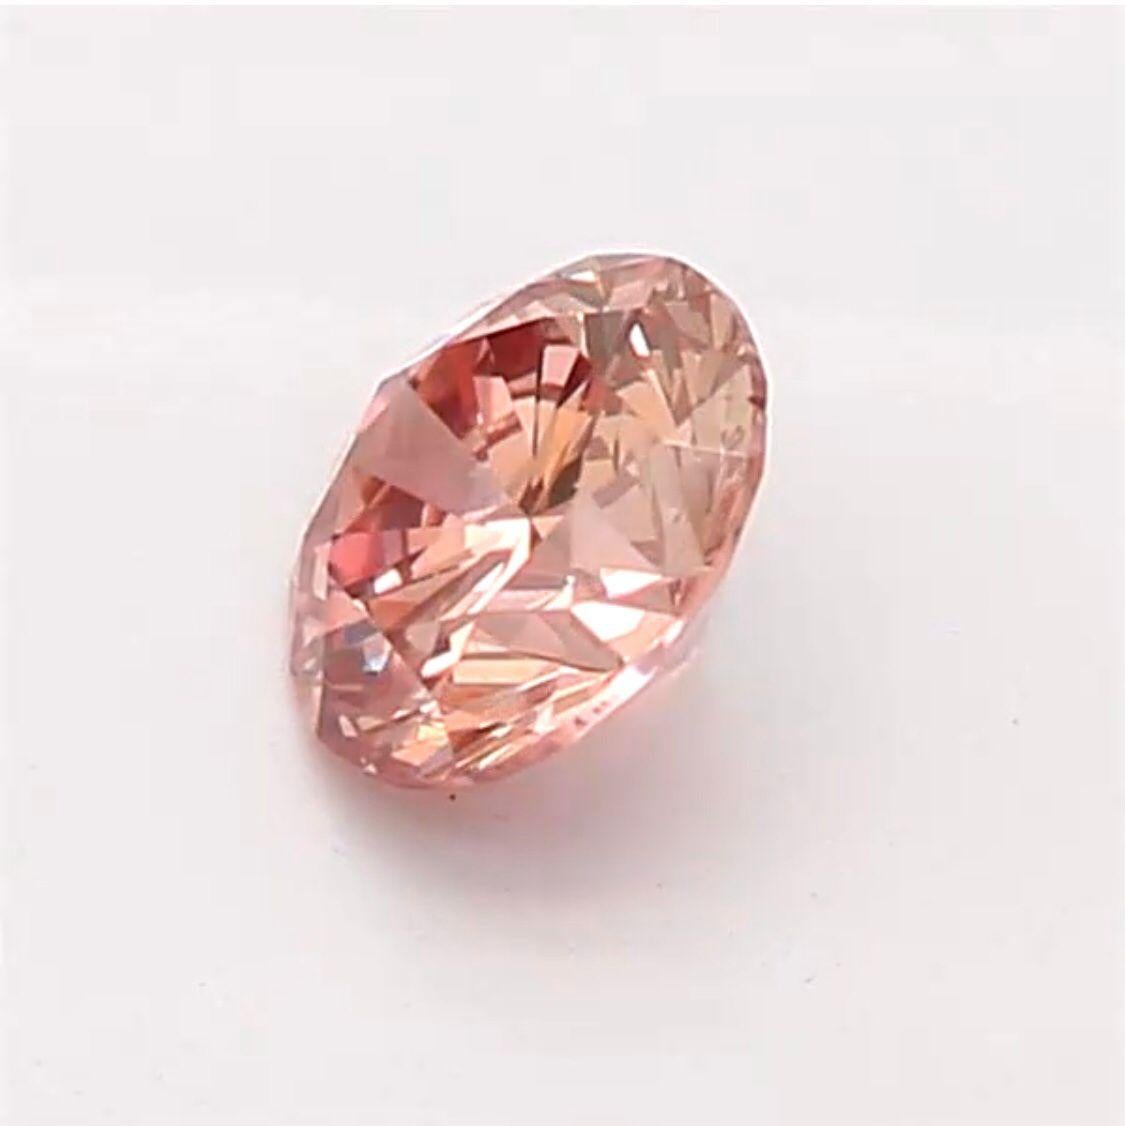 0.15 Carat Fancy Orangy Pink Round Shaped Diamond SI2 Clarity CGL Certified For Sale 5